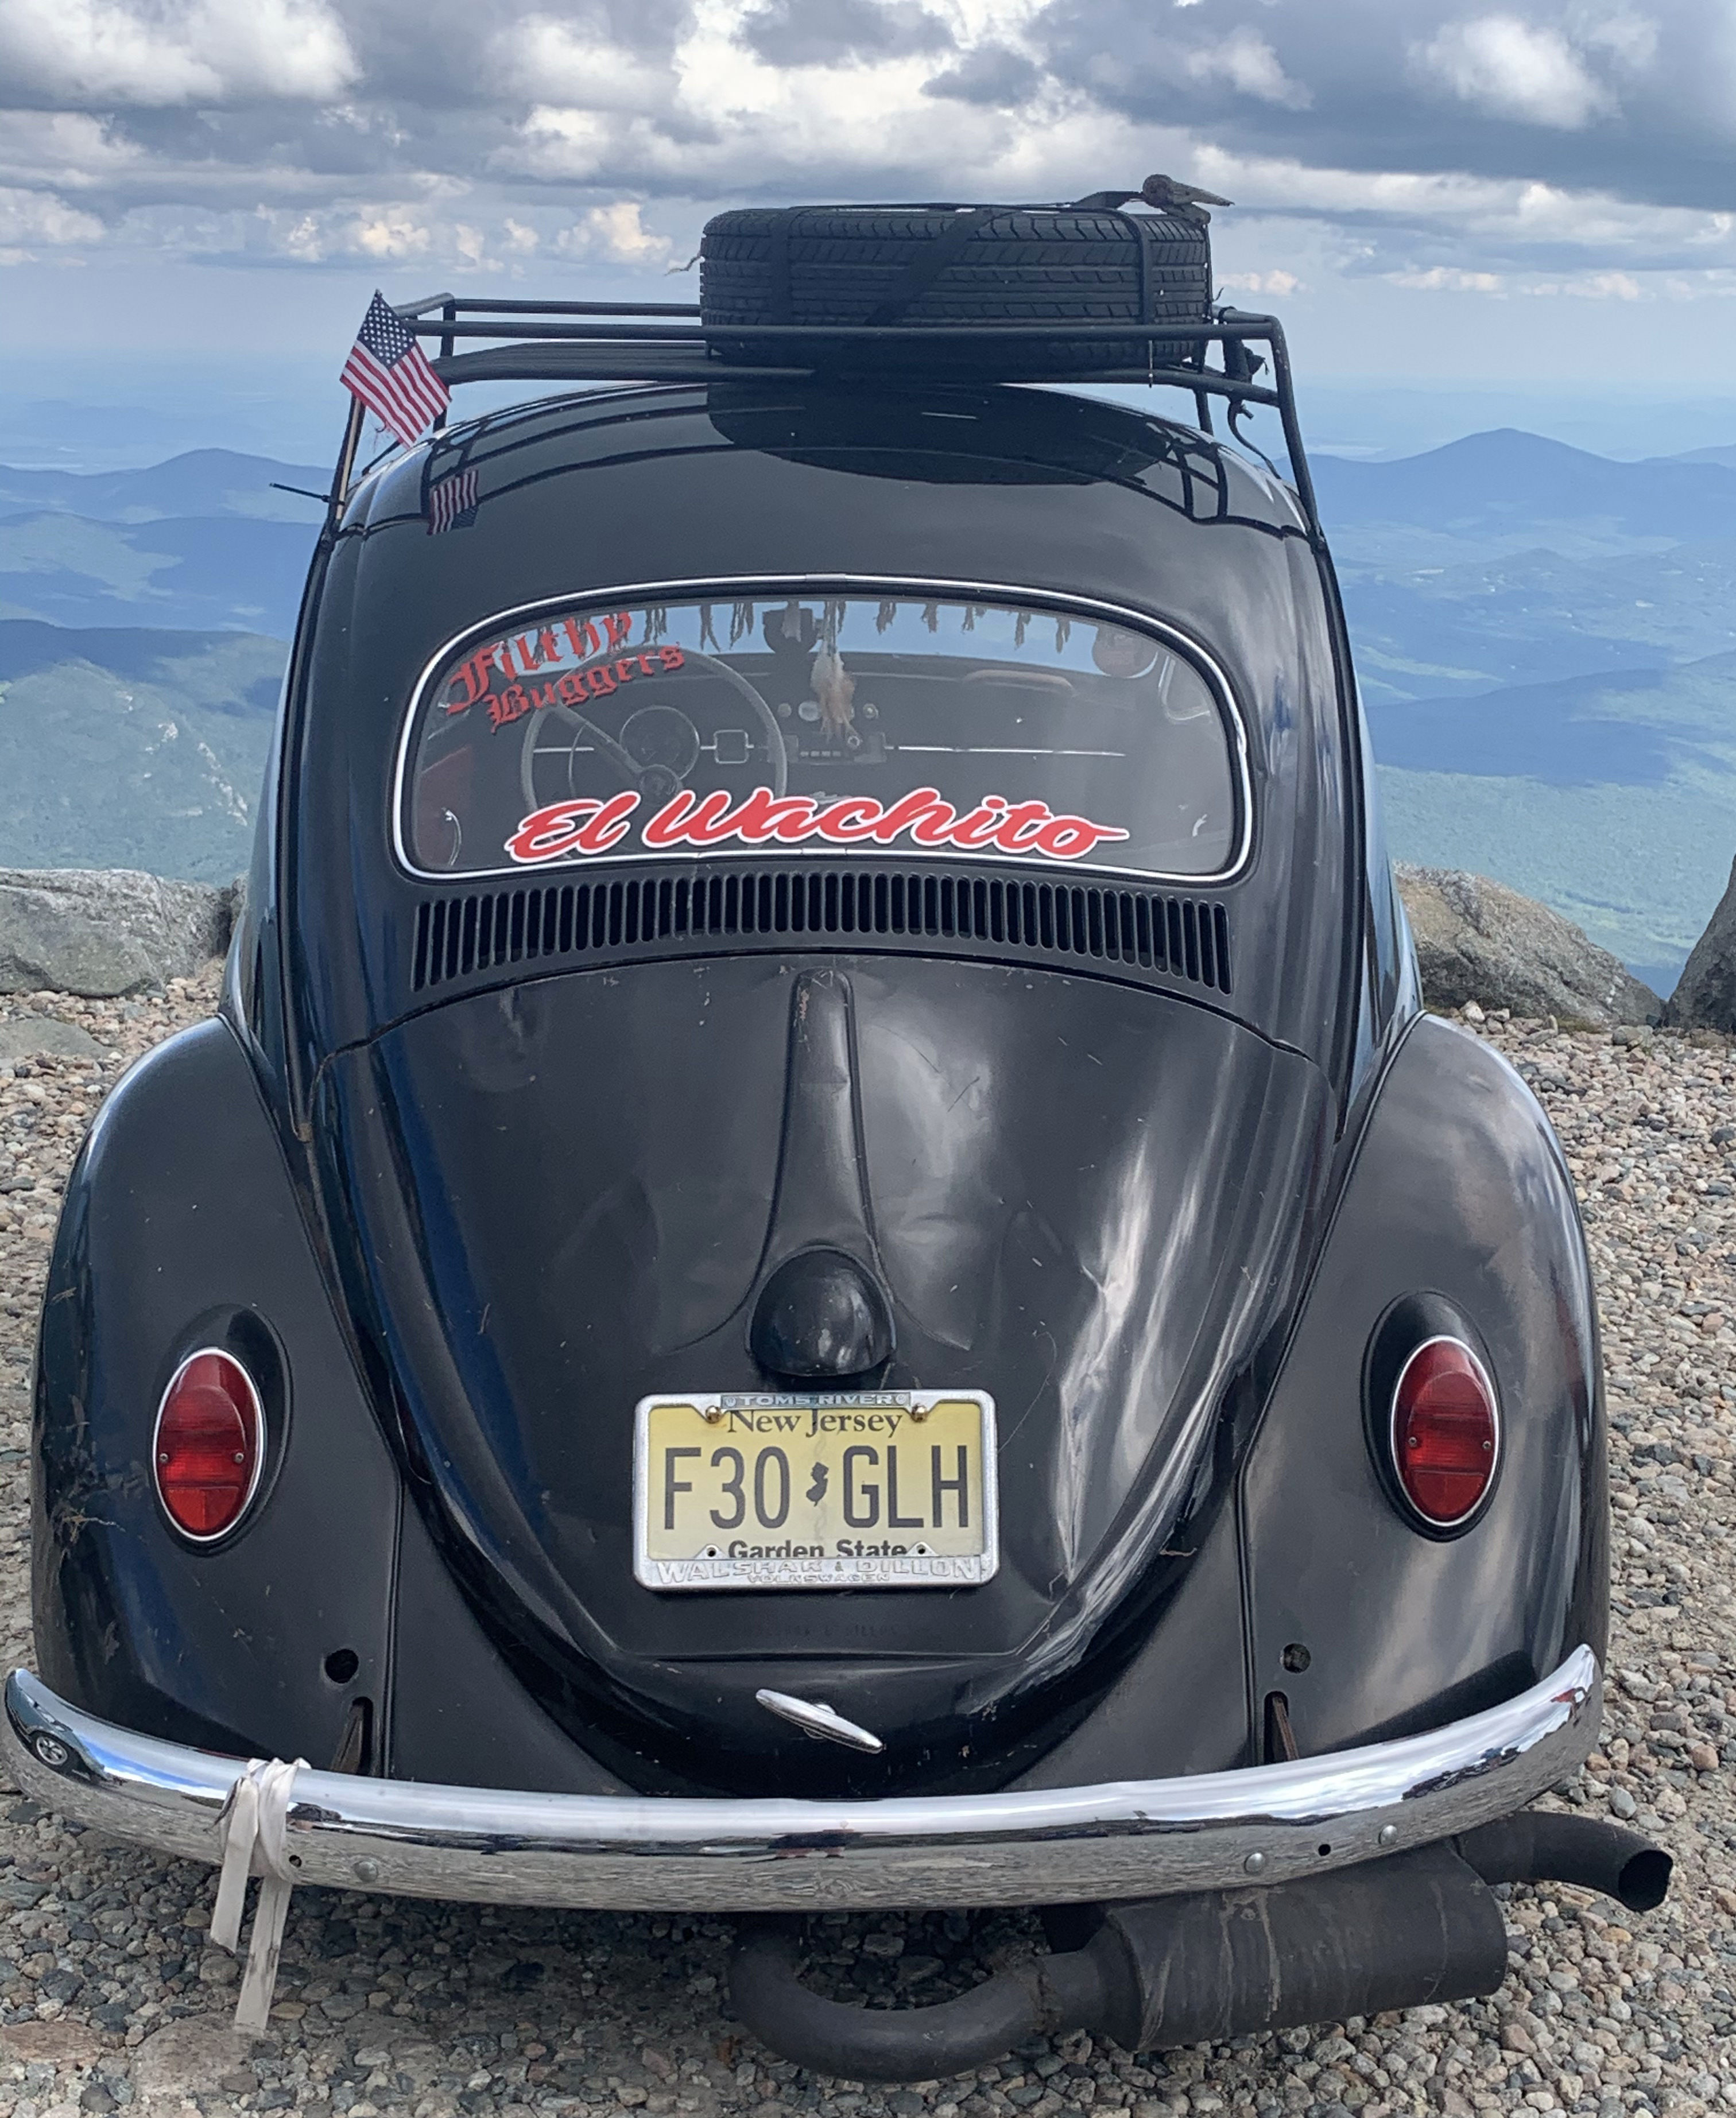 Rod's '63 Bug, with a new MSD coil (not shown)